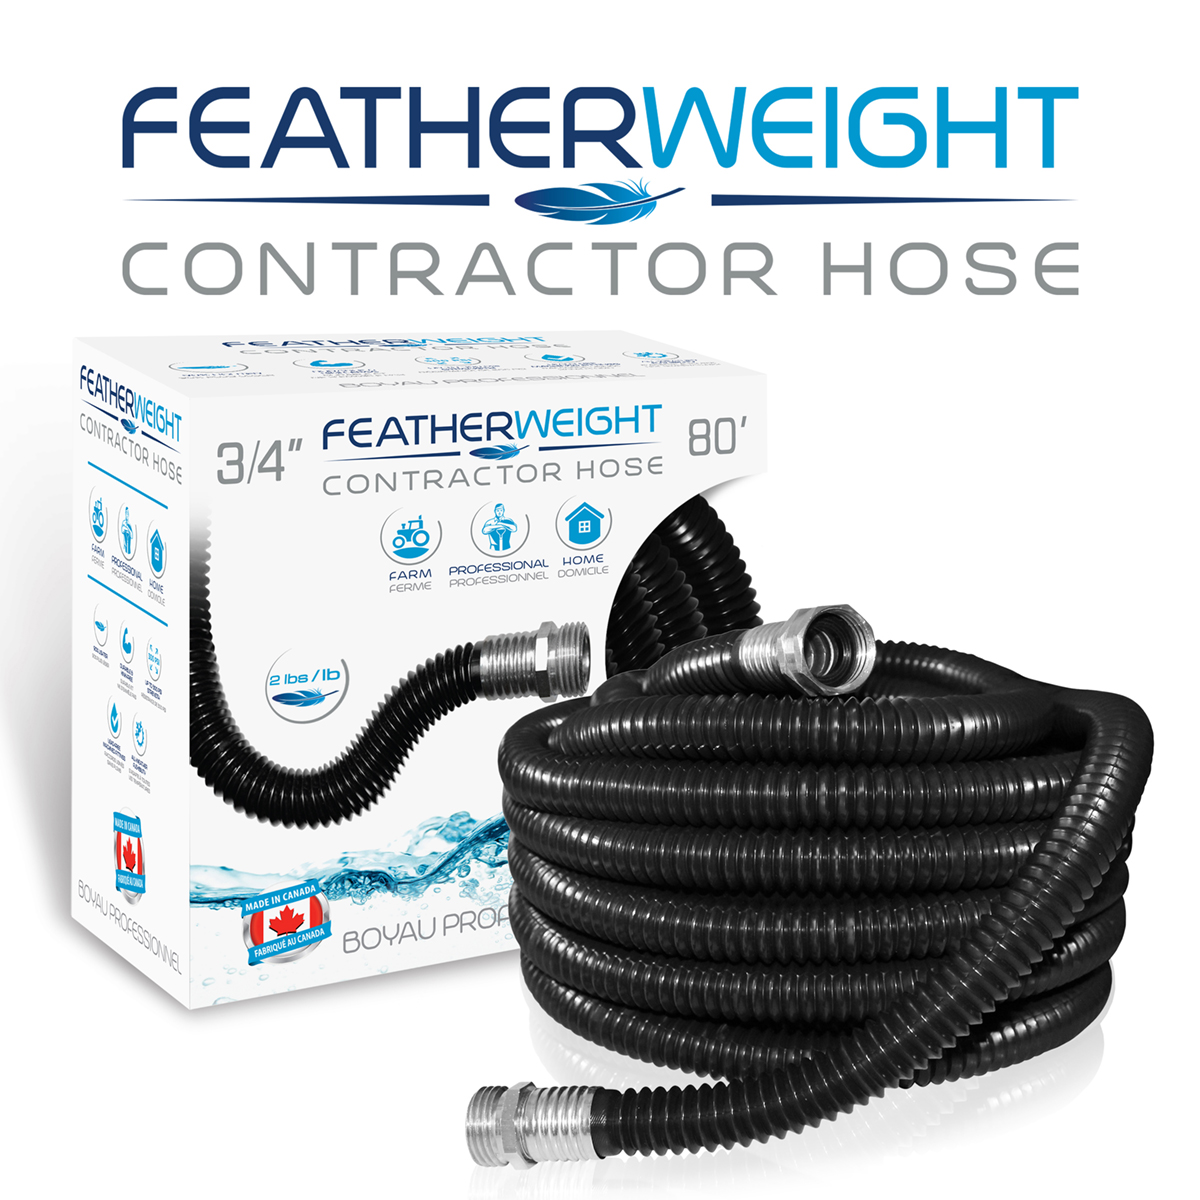 Picture of Featherweight Contractor Hose 80'